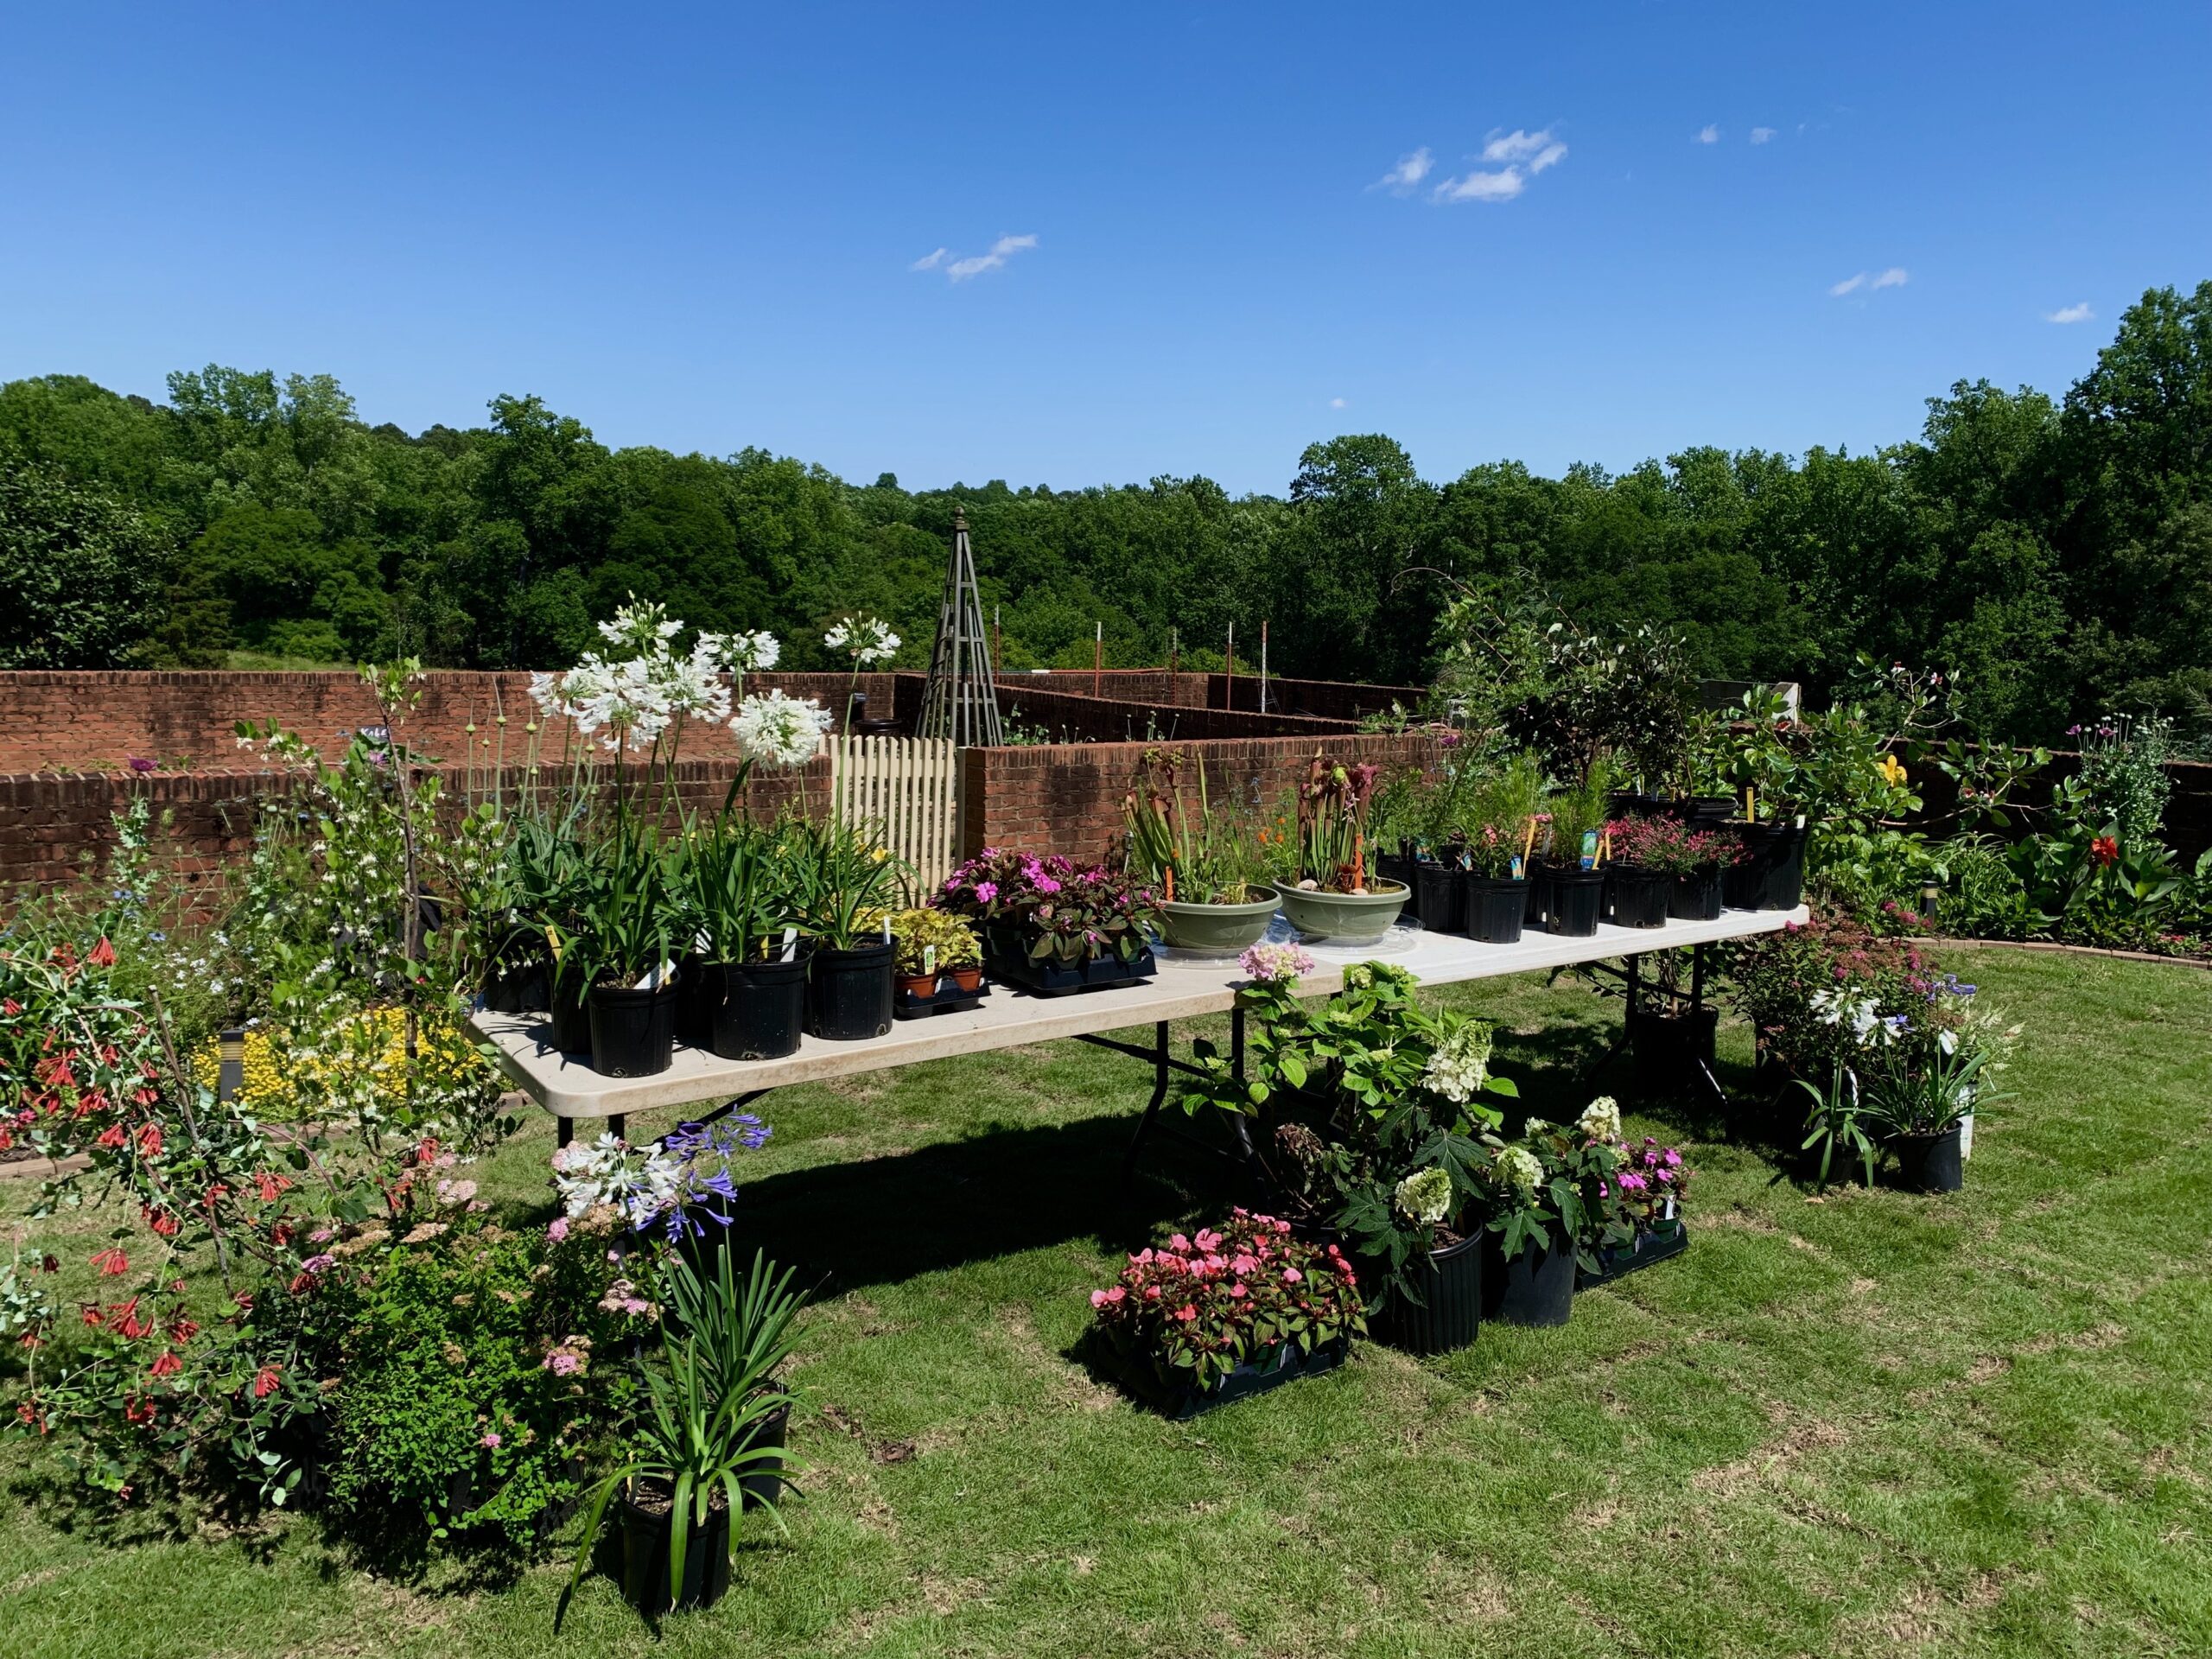 The 2024 South Carolina Botanical Garden plant sales feature a large selection of plants, including hard-to-find native species, seasonal annuals and vegetable transplants. Other features include culinary herbs, bog plants, herbaceous perennials, native ferns, flowering shrubs, ornamental grasses, and flowering, fruit and shade trees.